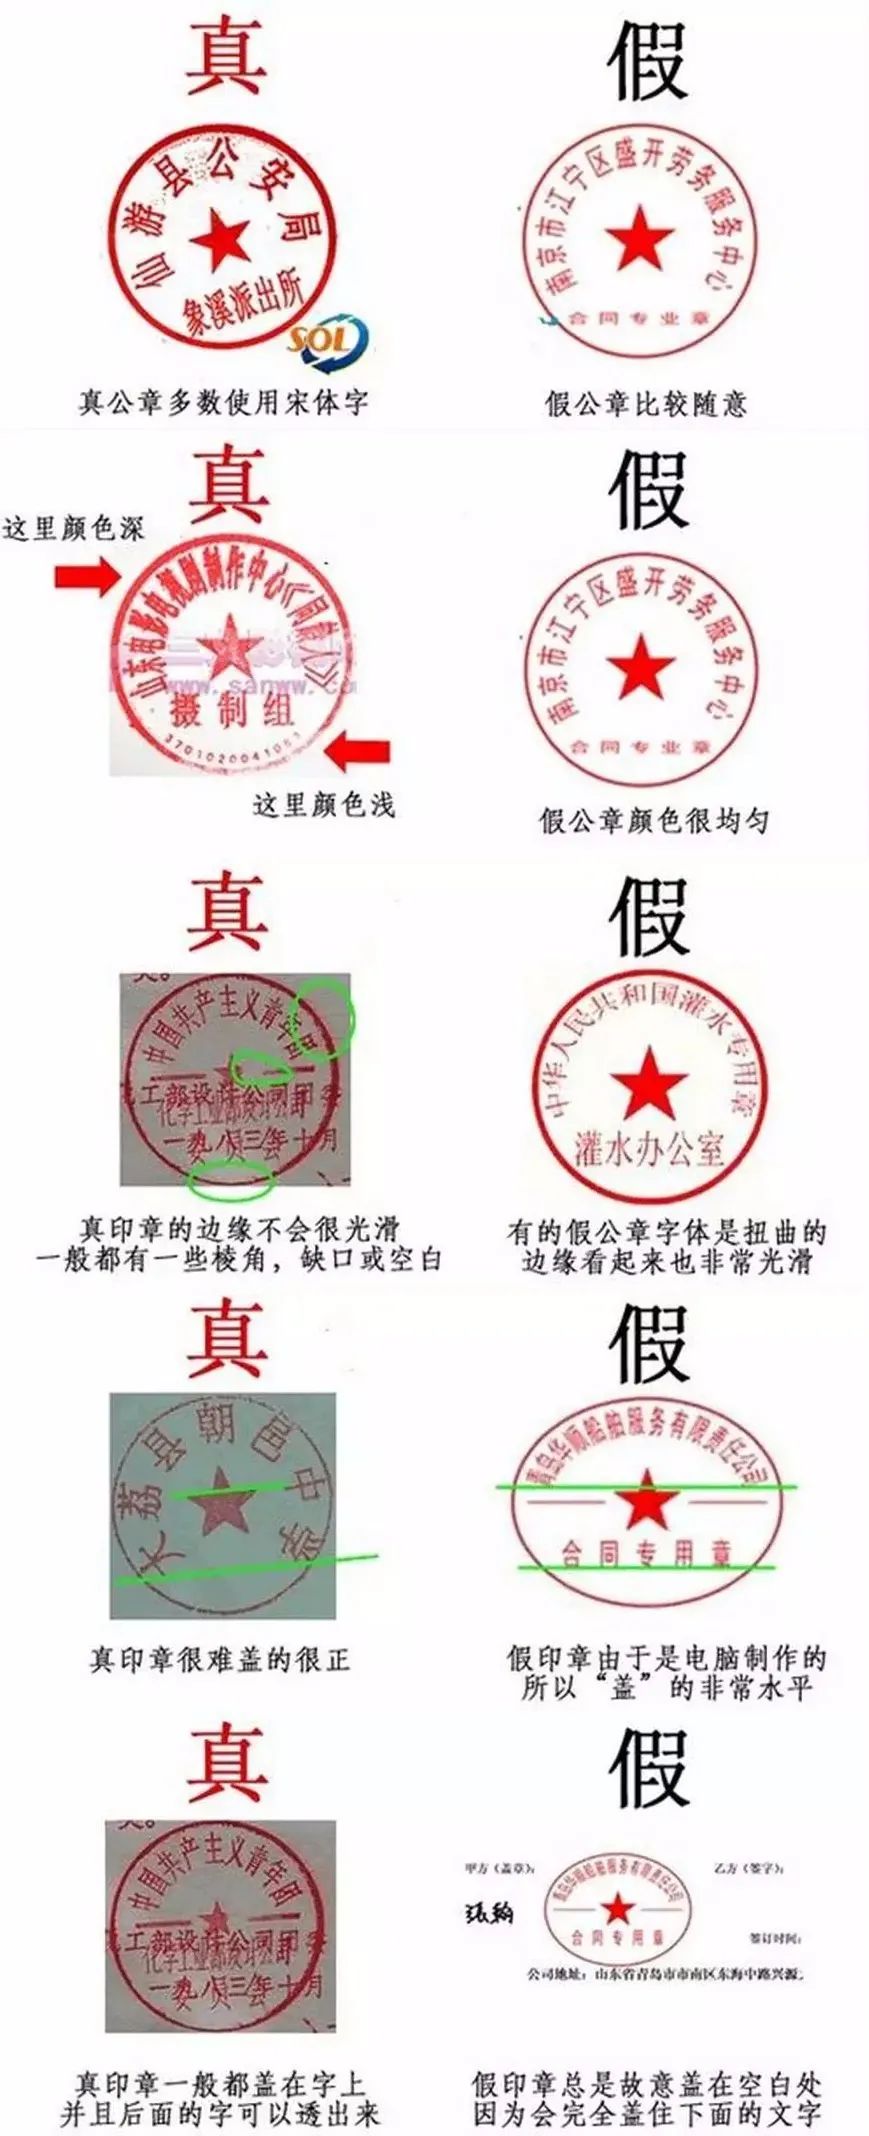 How to quickly identify genuine and fake official seals? Dry goods!